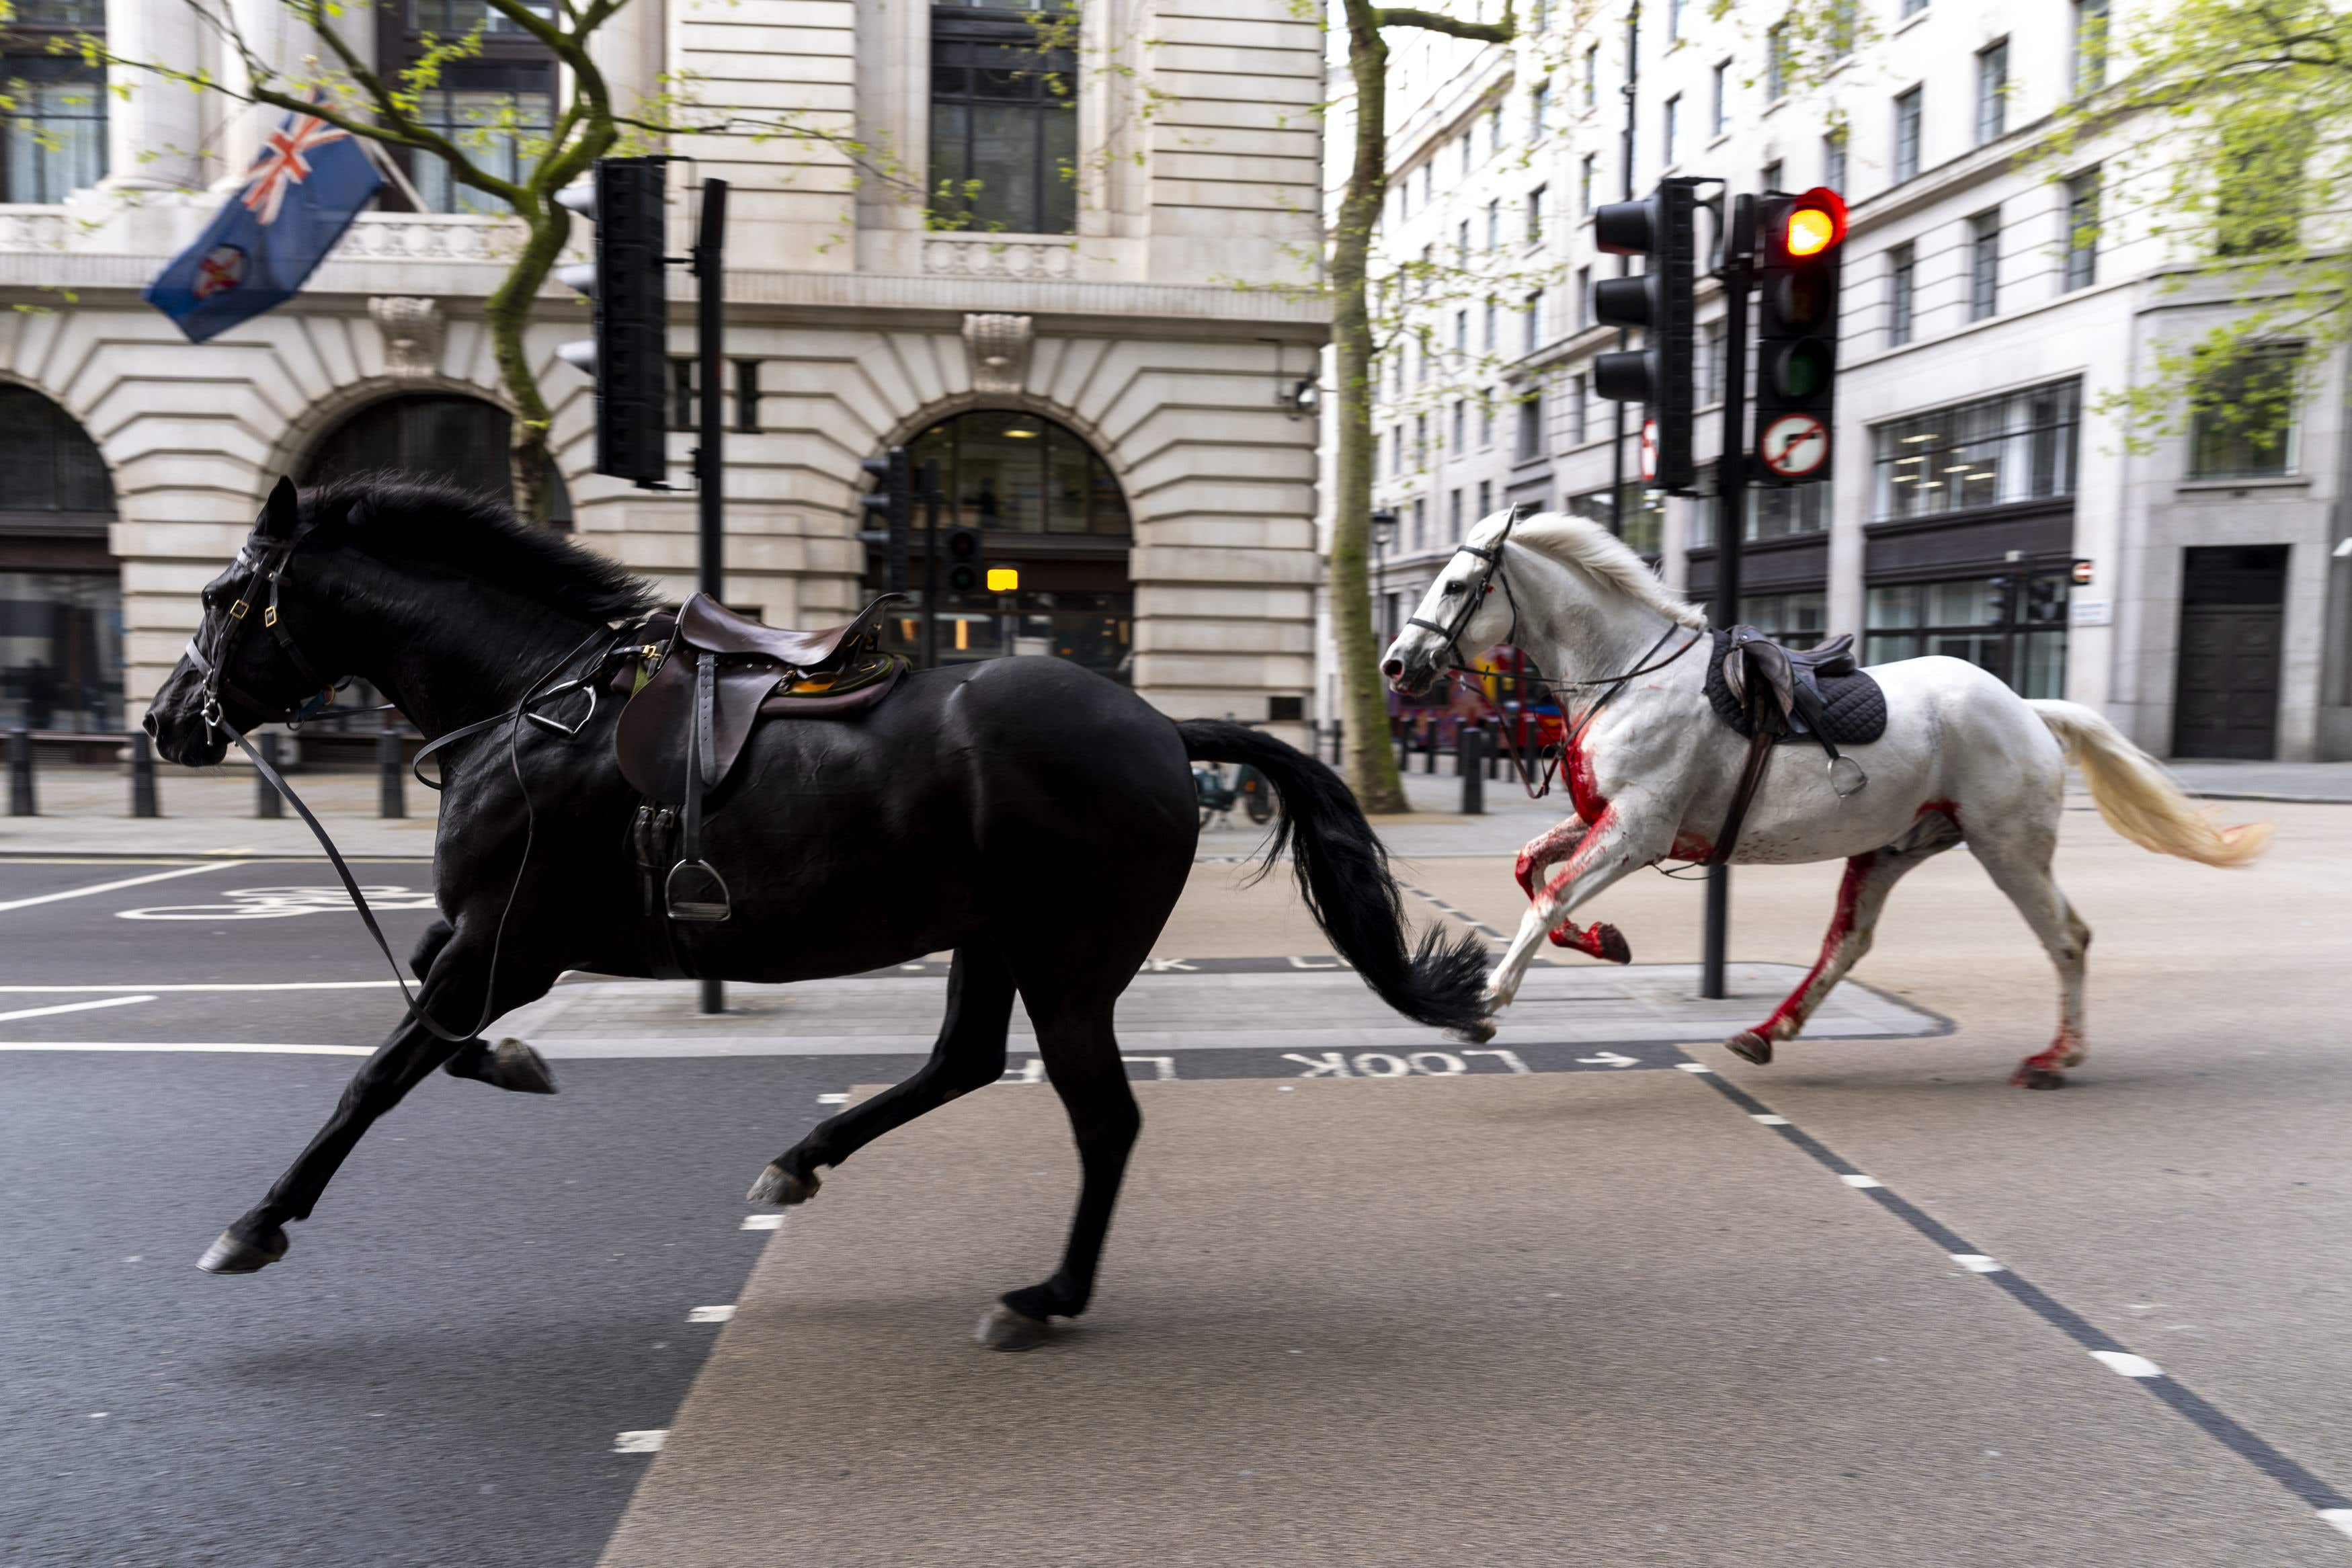 Three of the escaped military horses will be involved in Trooping the Colour